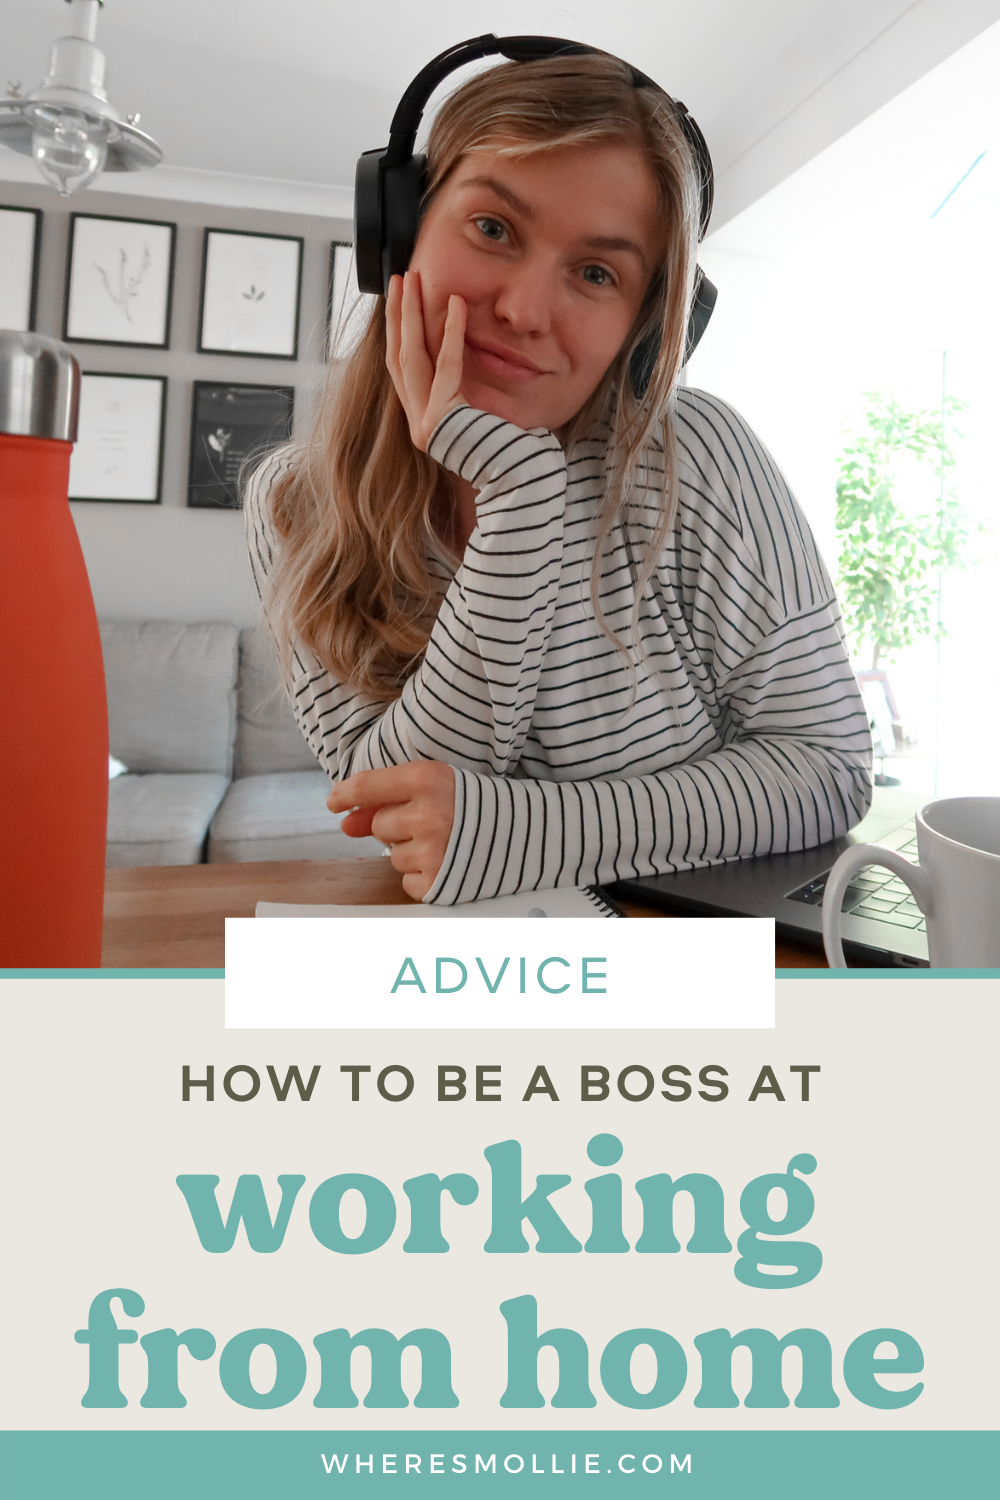 20 top tips for working from home